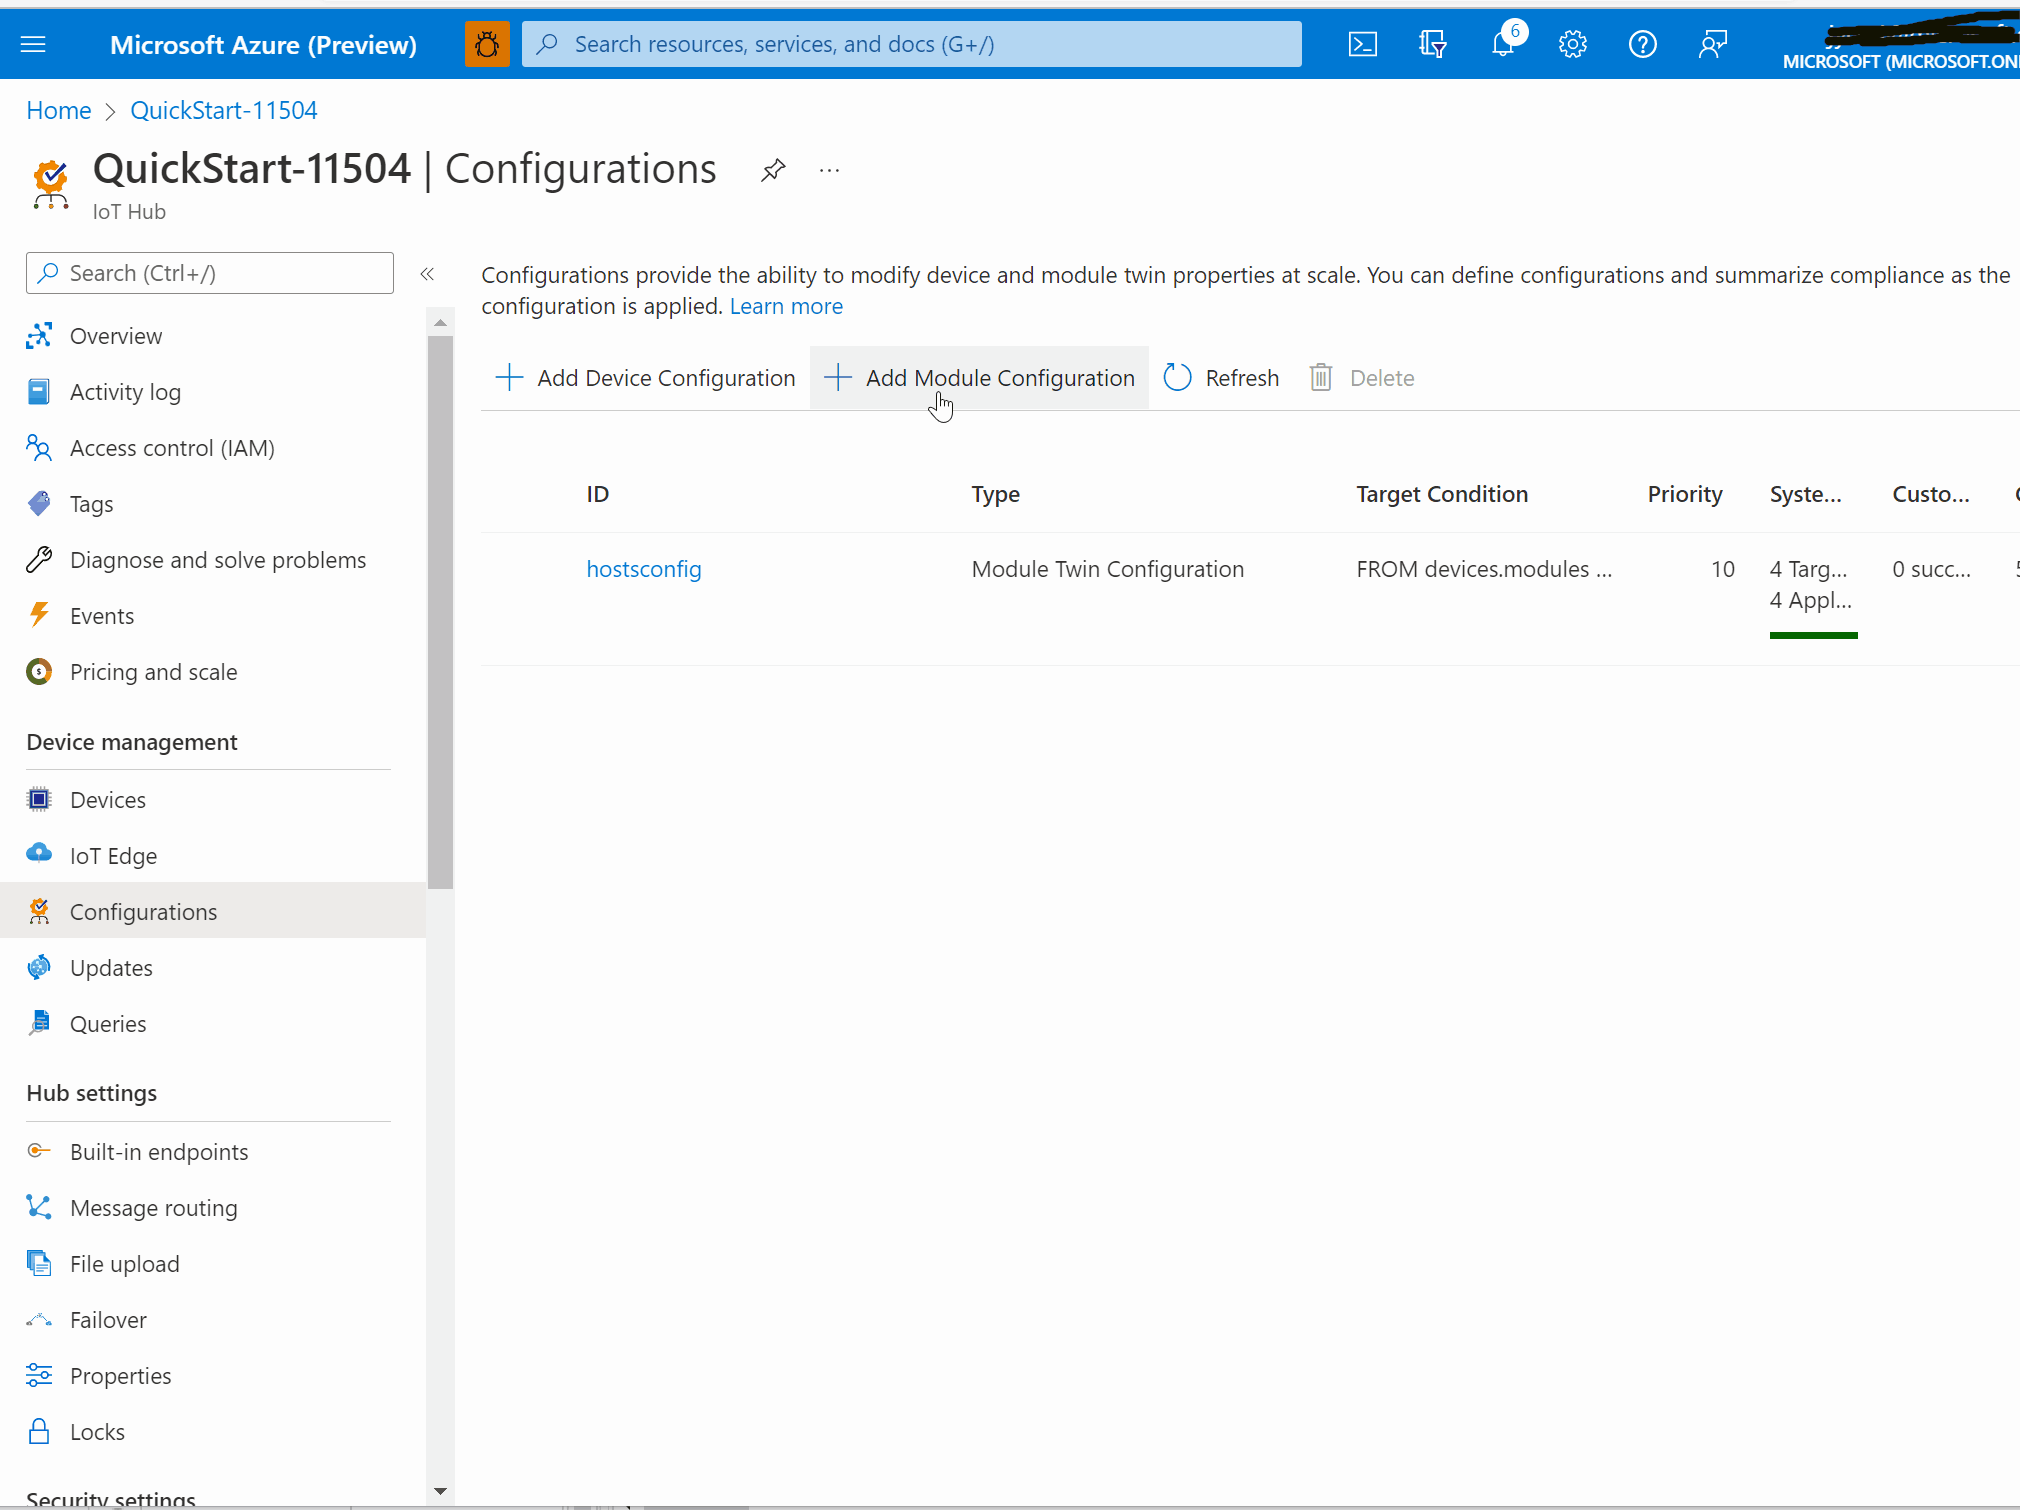 Screen capture showing how to update hosts file using Configuration from Azure Portal